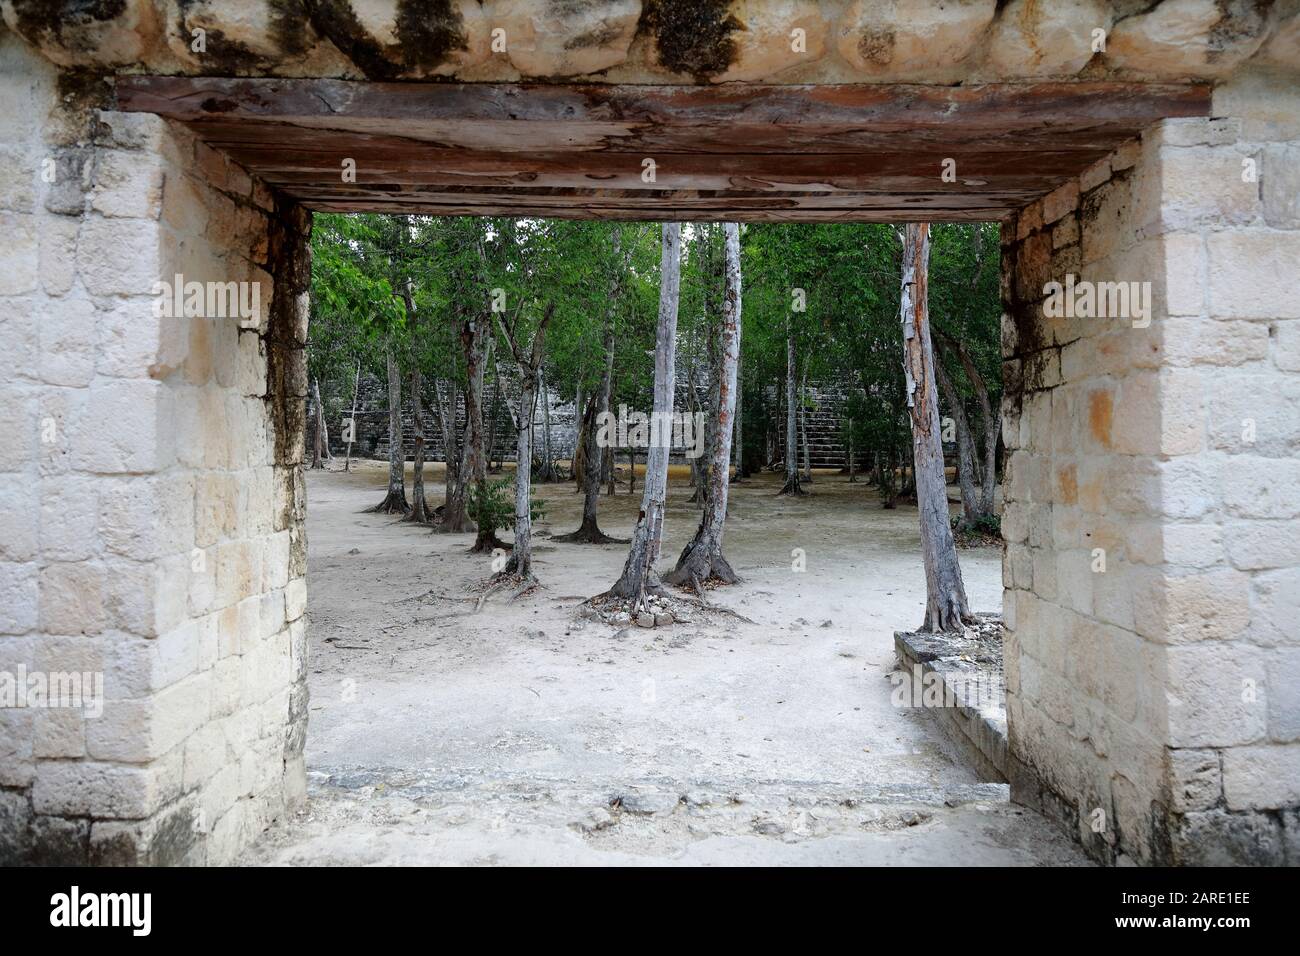 Peering though the stone-framed entrance to the ancient Mayan city of Balamku, Mexico, the pah to its main temple overgrown with young sapplings. Stock Photo